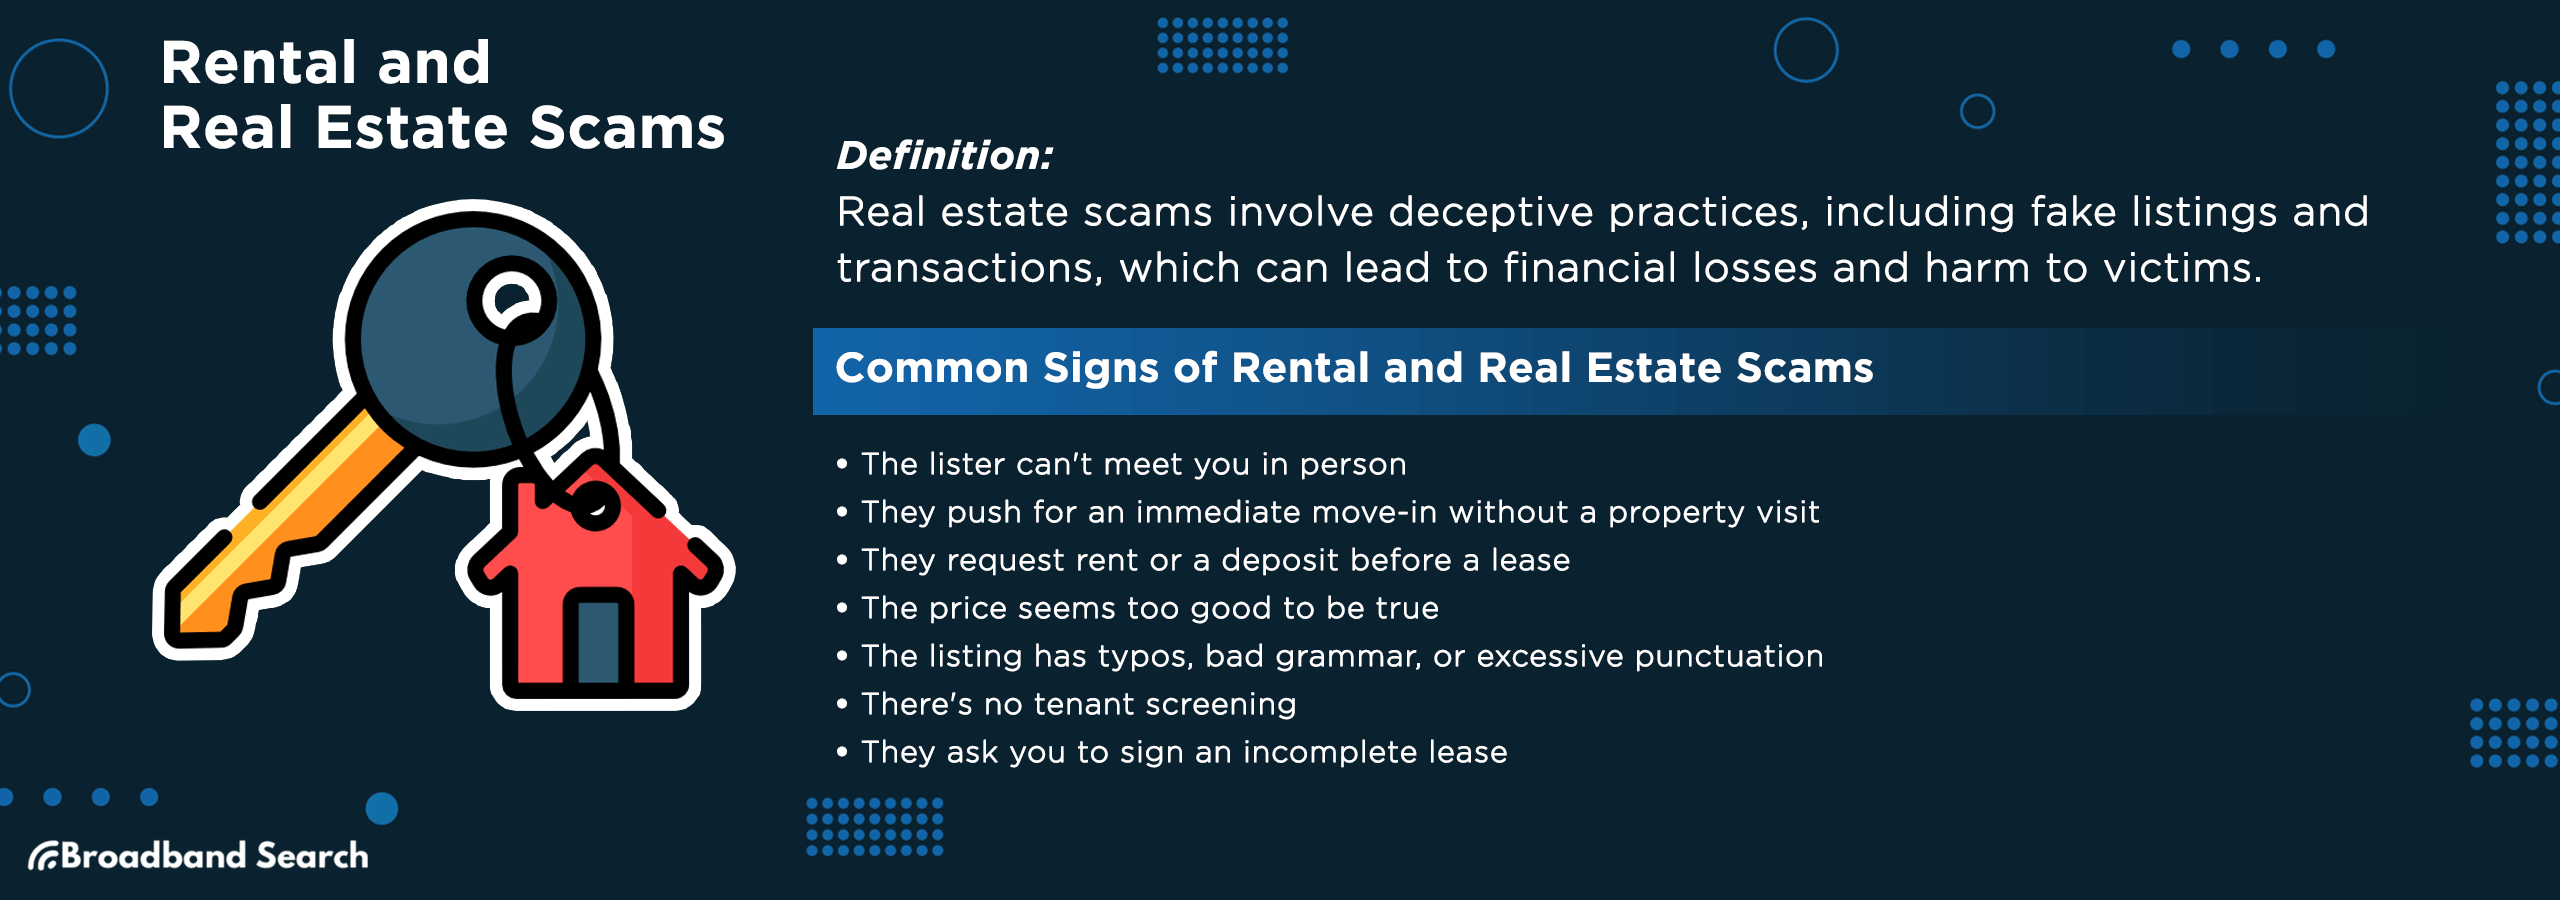 Definition and signs of rental and real estate scams